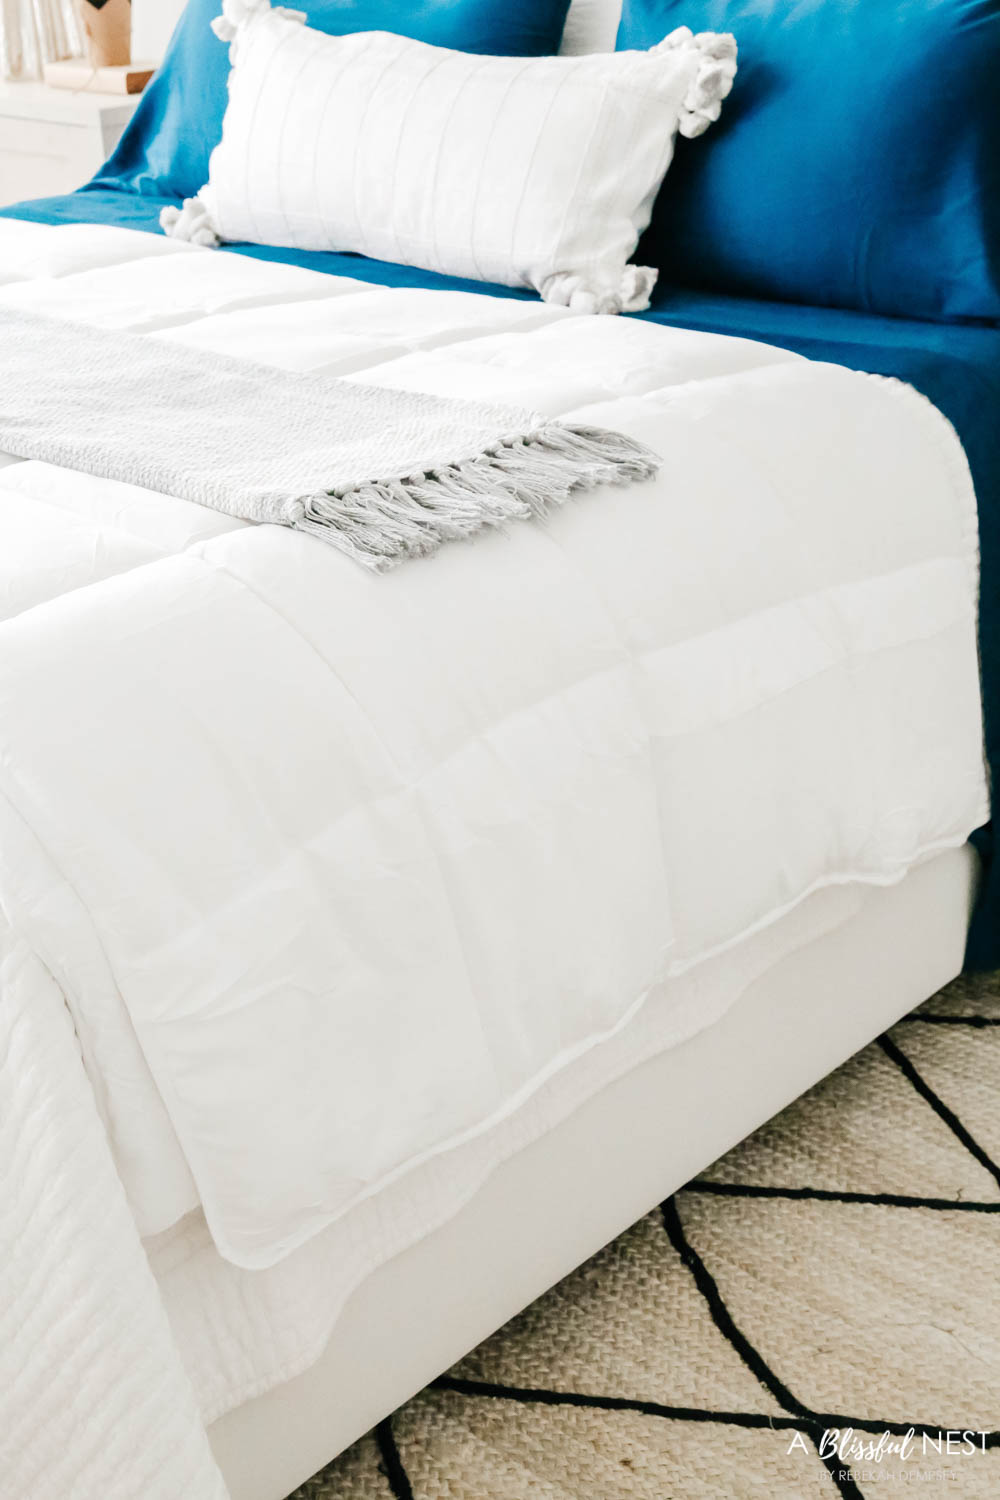 a lightweight blanket is drapped across the end of the bed for extra warmth